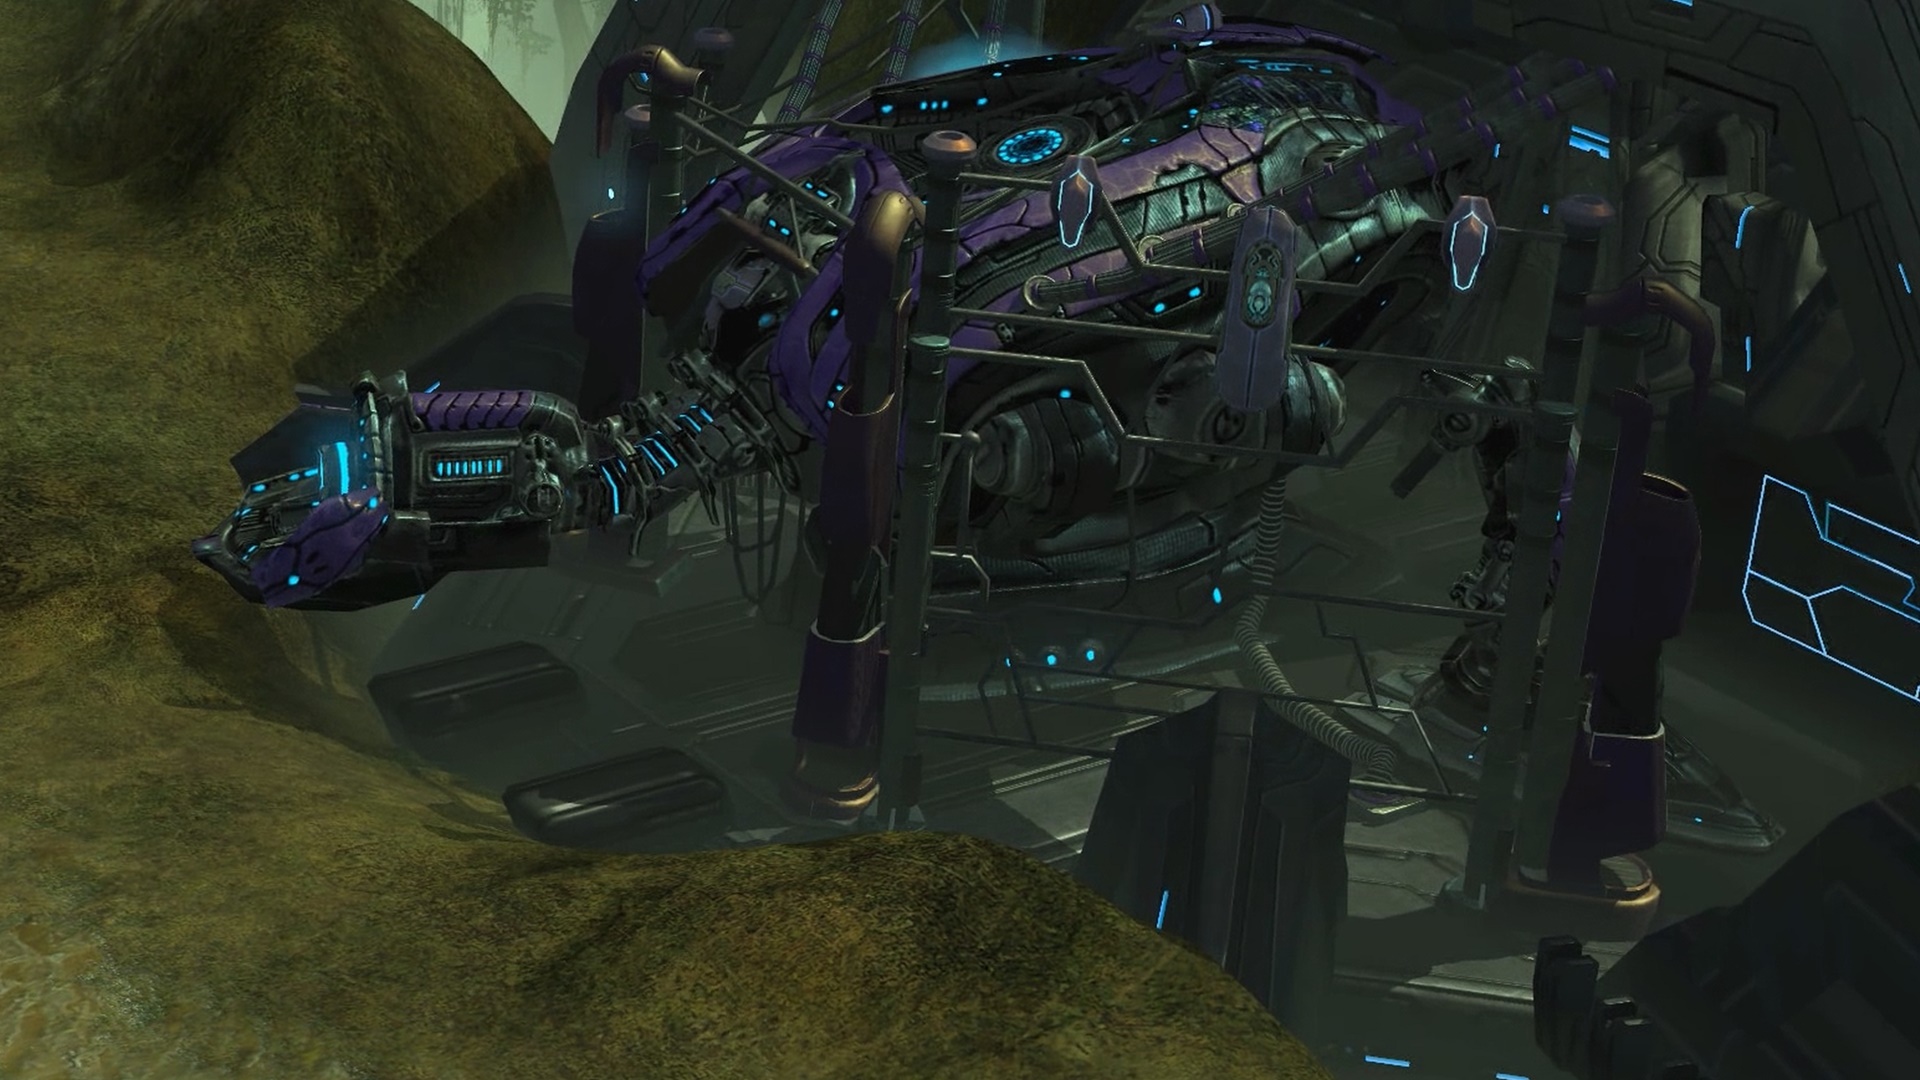 Halo Wars screenshot of the so-called "Super Scarab"